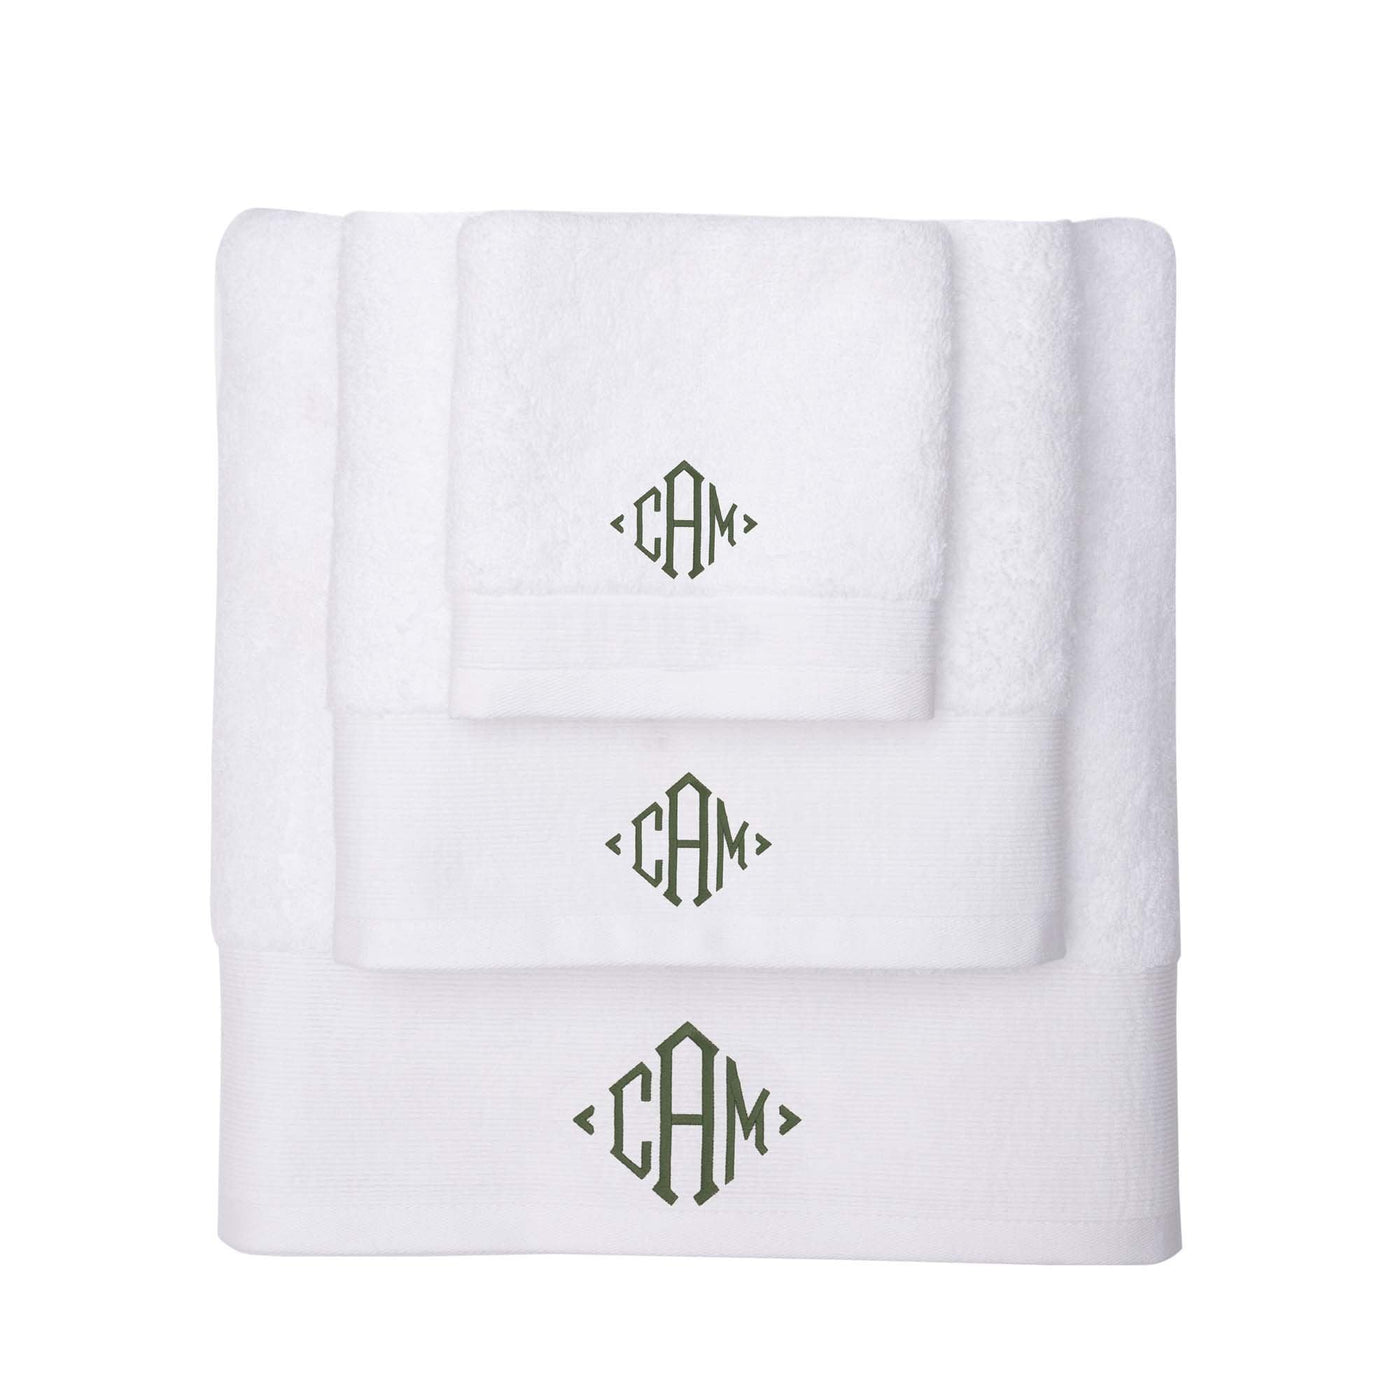 James Bond Inspired Embroidered Como 700gsm Towel Collection